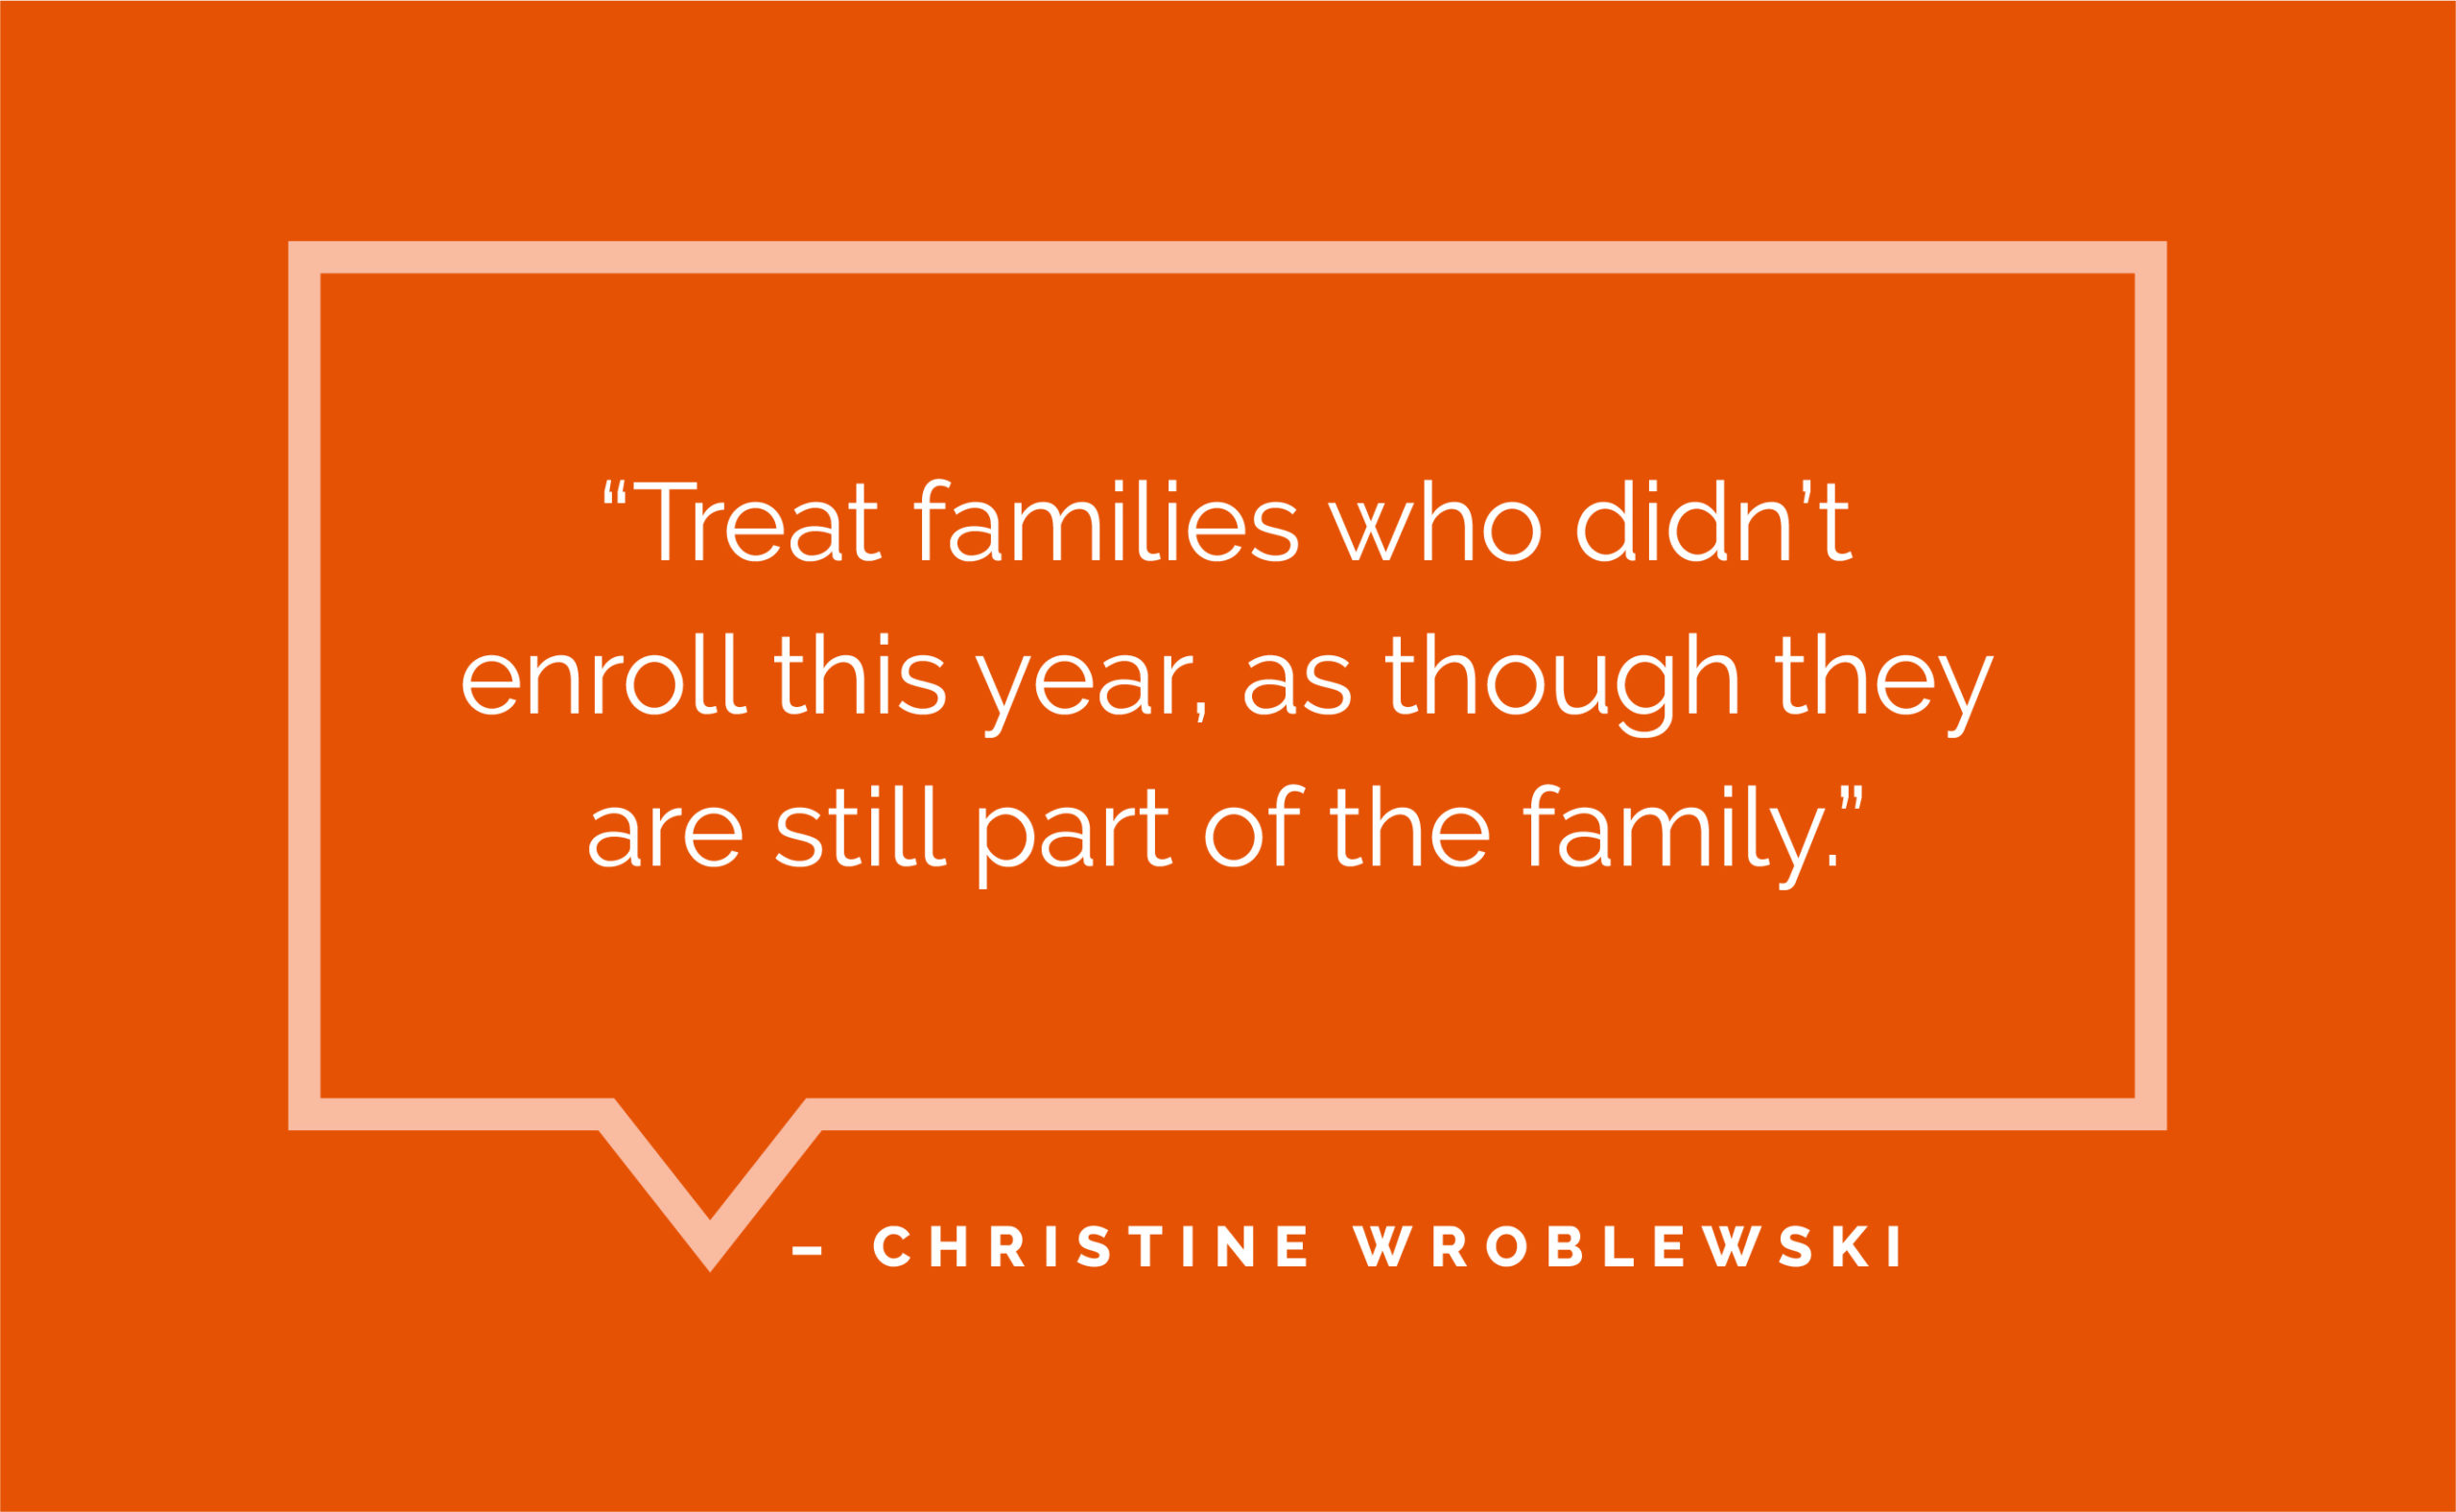 “Treat families who didn’t enroll this year, as though they are still part of the family.” - Christine Wroblewski